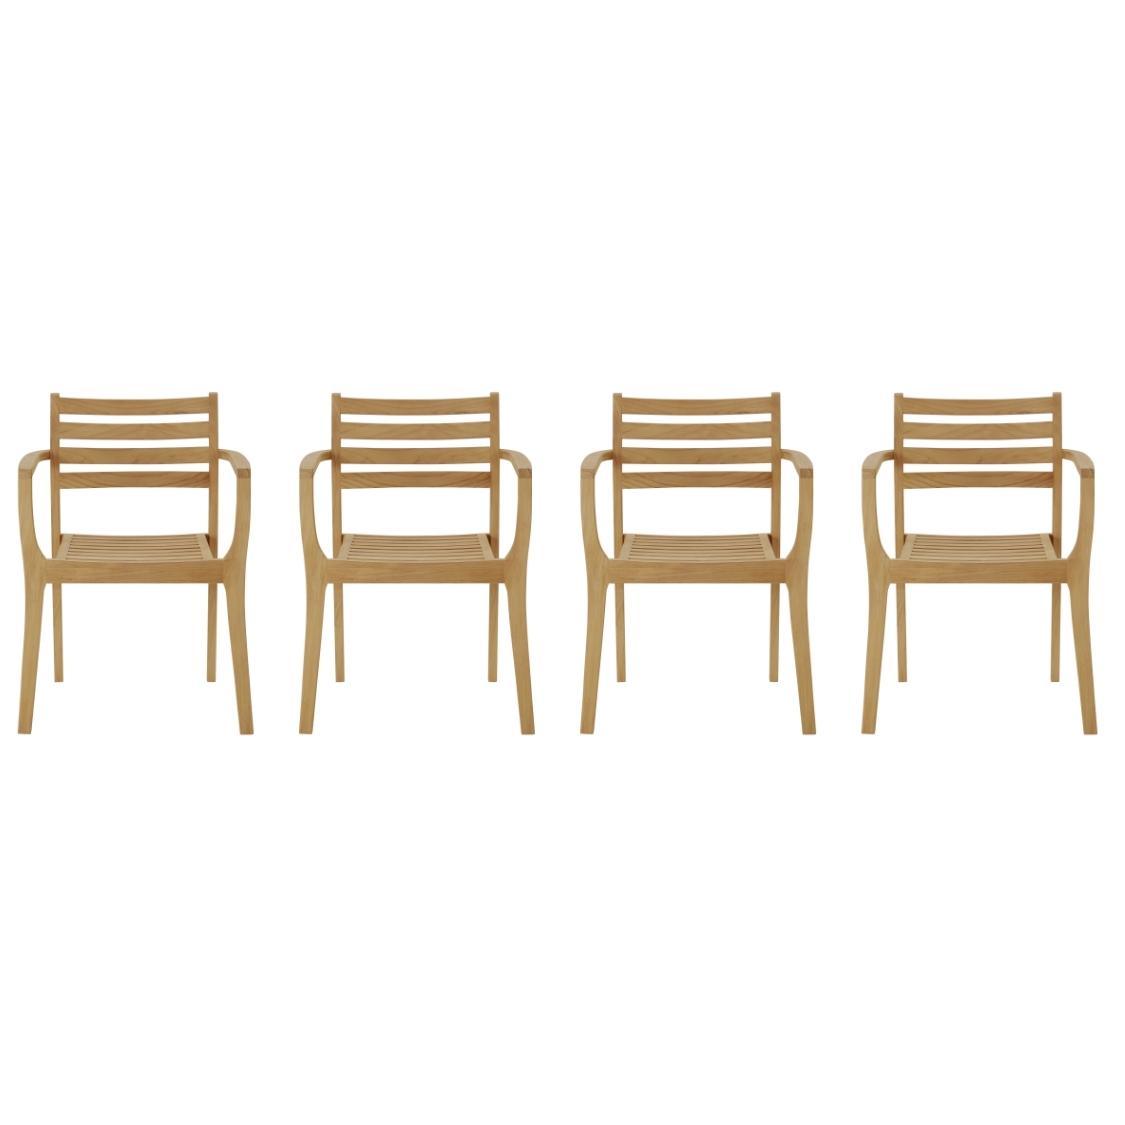 LOOMLAN Outdoor - Kolding Stacking Armchair (Set of 4) - Outdoor Dining Chairs